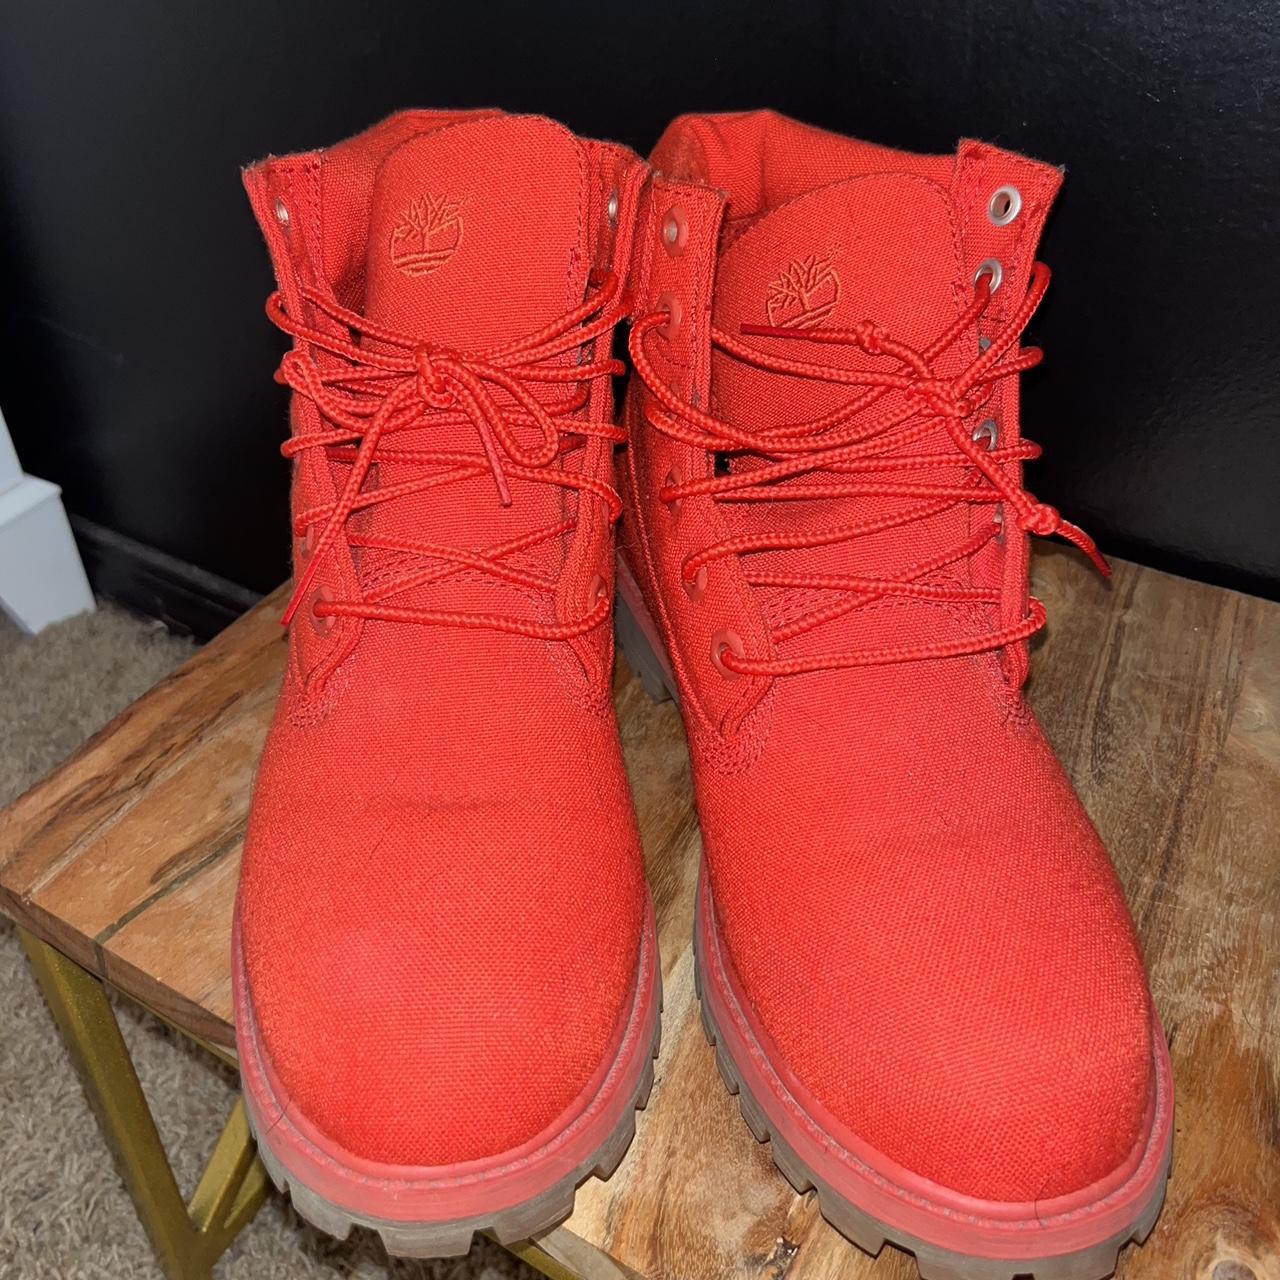 Red Timberland Boots size 7/7.5 #timberlands #boots... - Depop